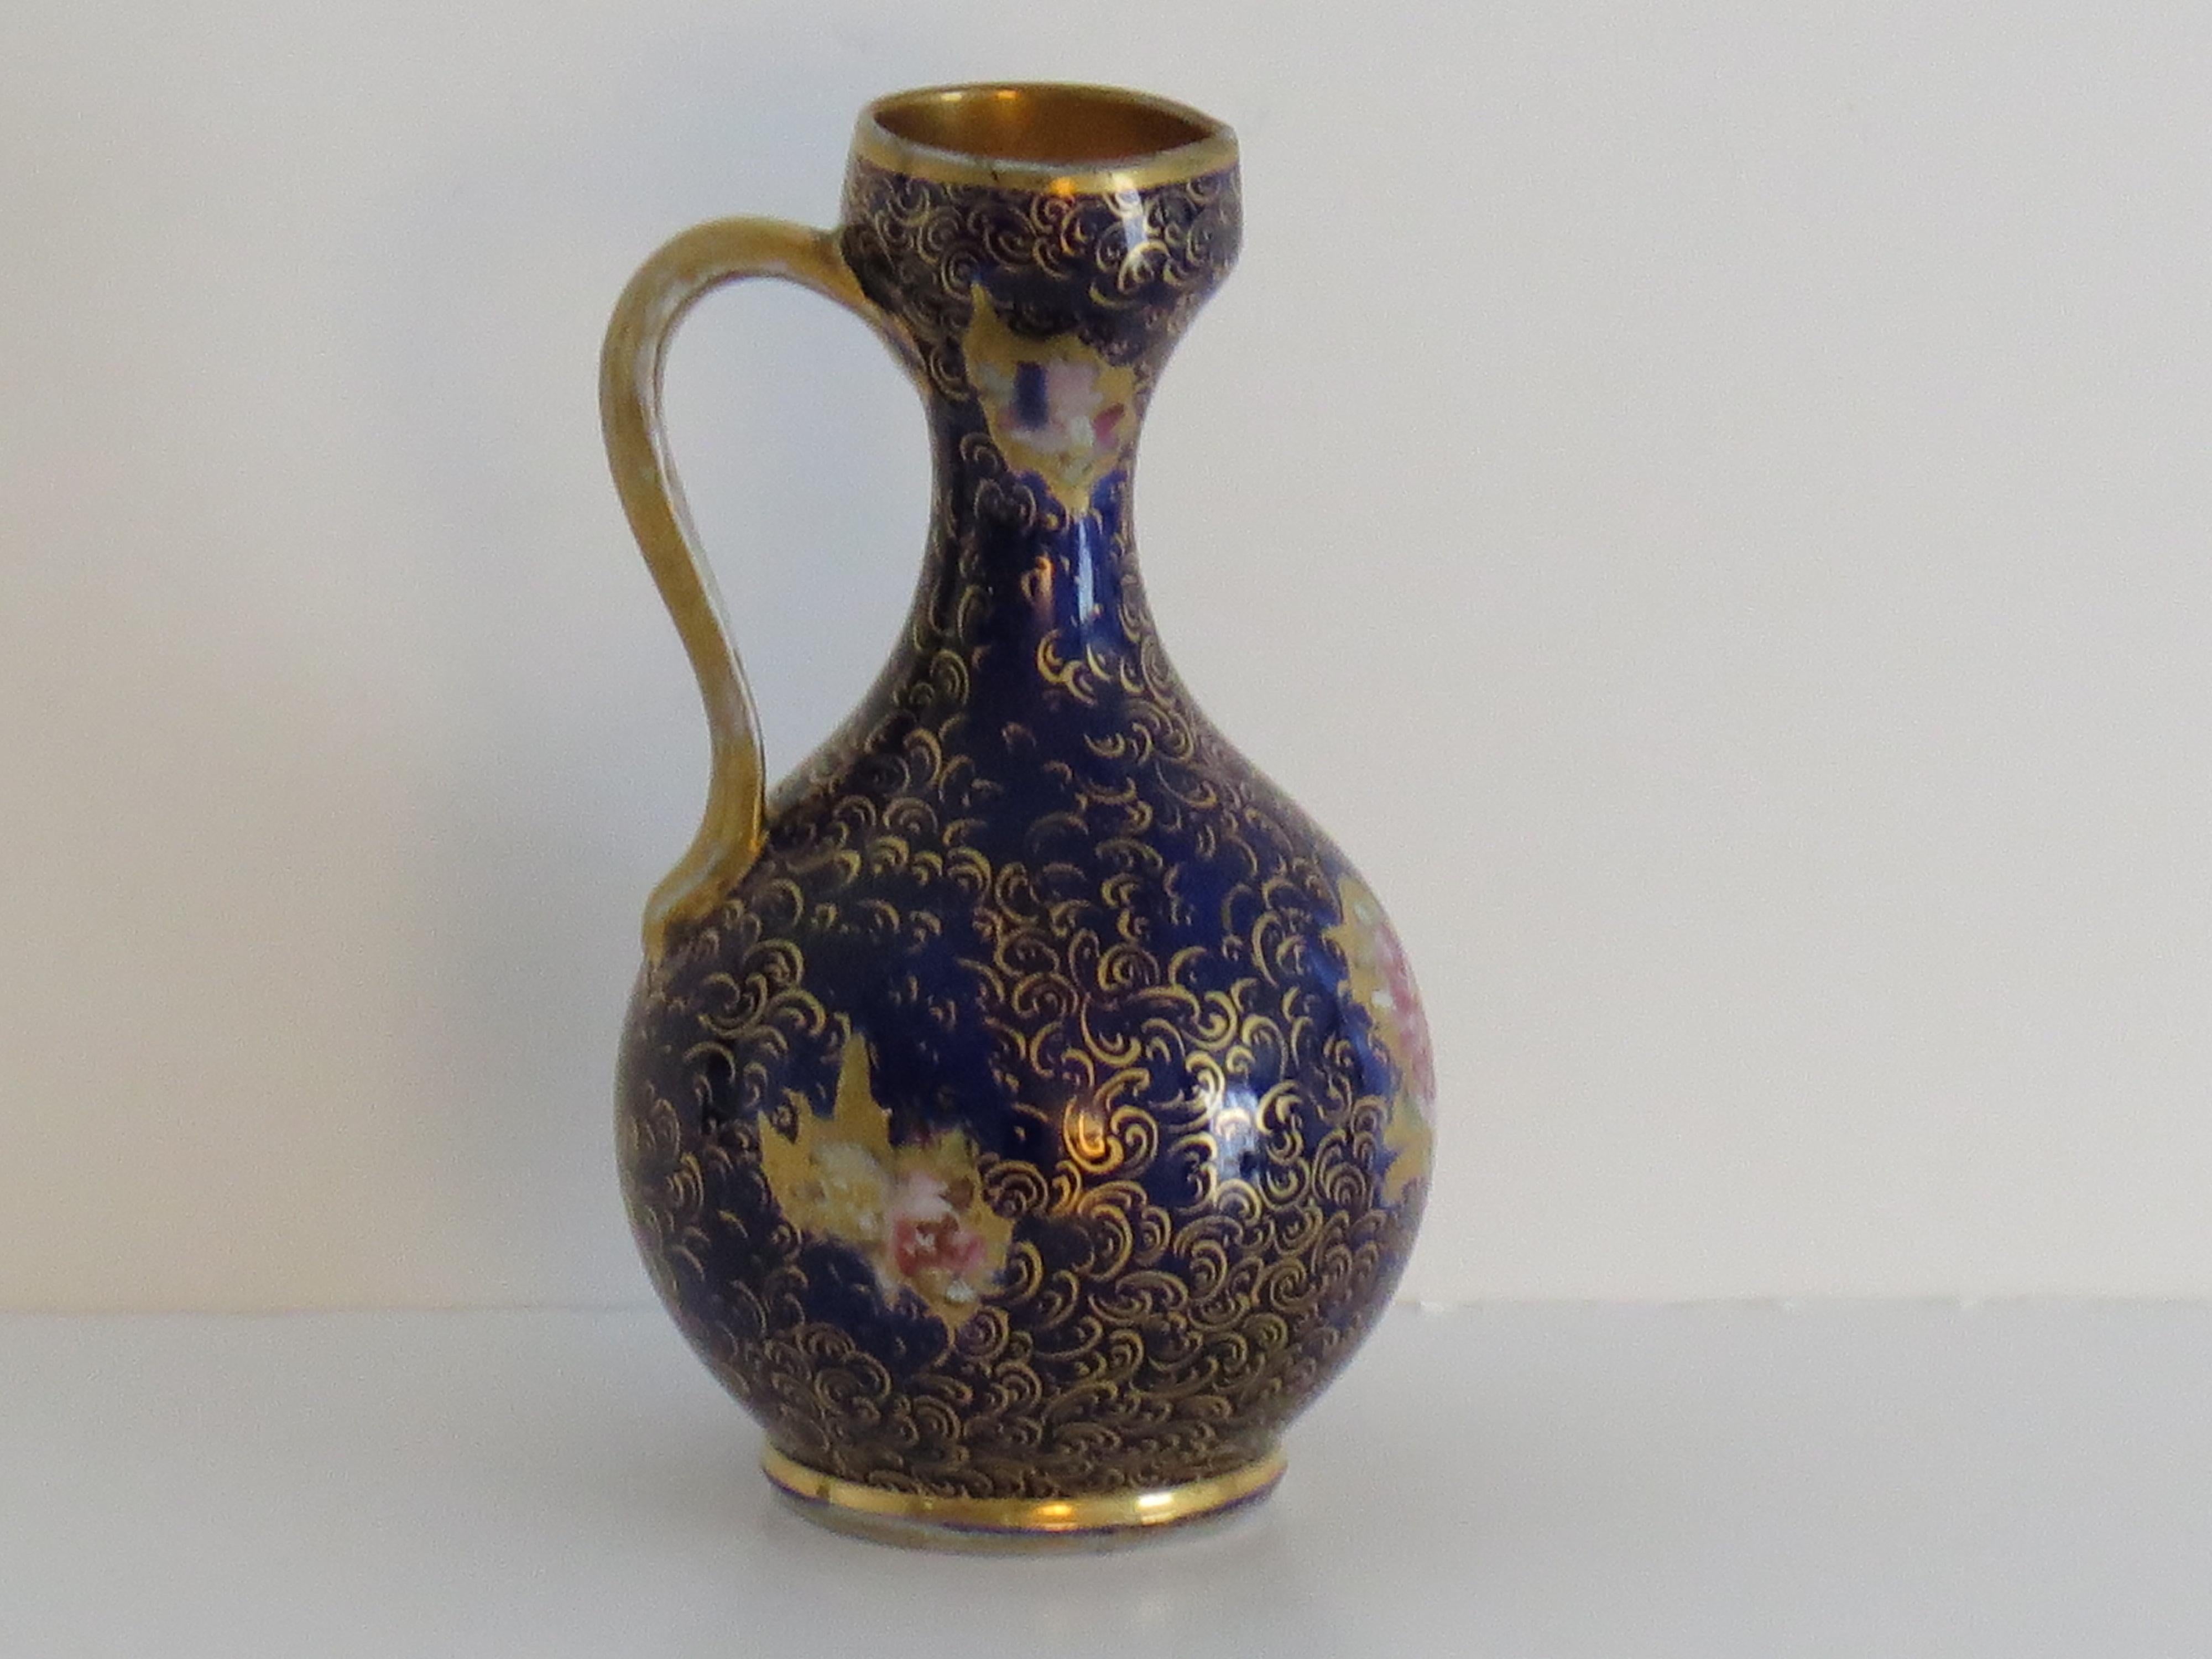 This is a very rare shaped early Jug or pitcher, hand painted in the gold gilded Rose Posies pattern against a Mazarine blue ground, made by Mason's Ironstone, Lane Delph, England and dating to circa 1813-1820.

This jug is hand potted in a very